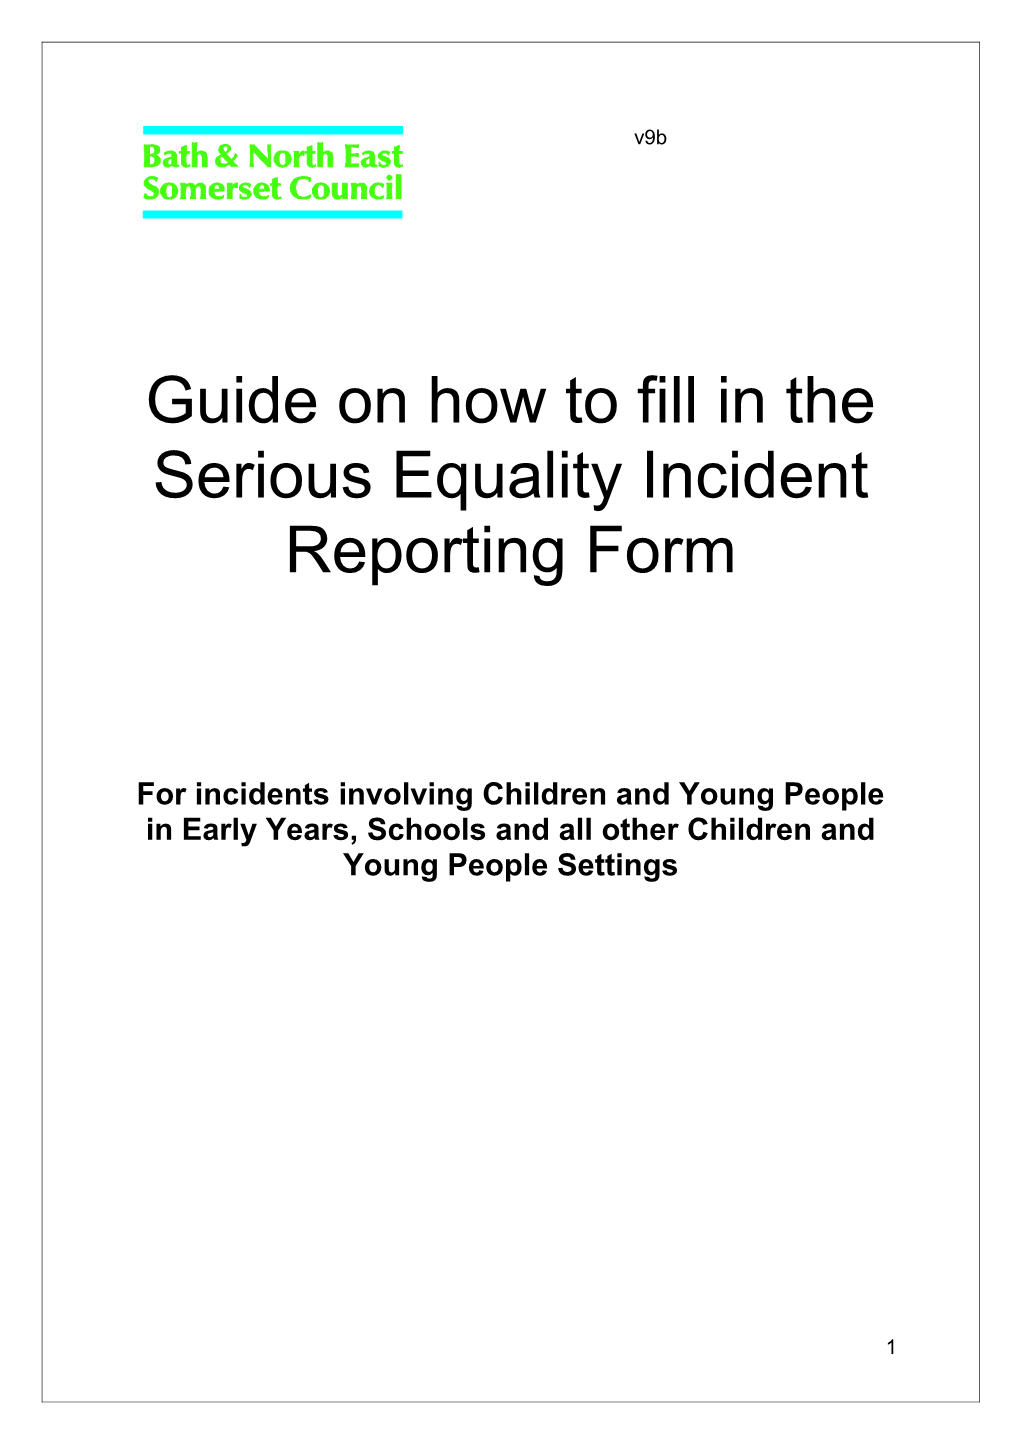 Guide on How to Fill in the Serious Equality Incident Reporting Form